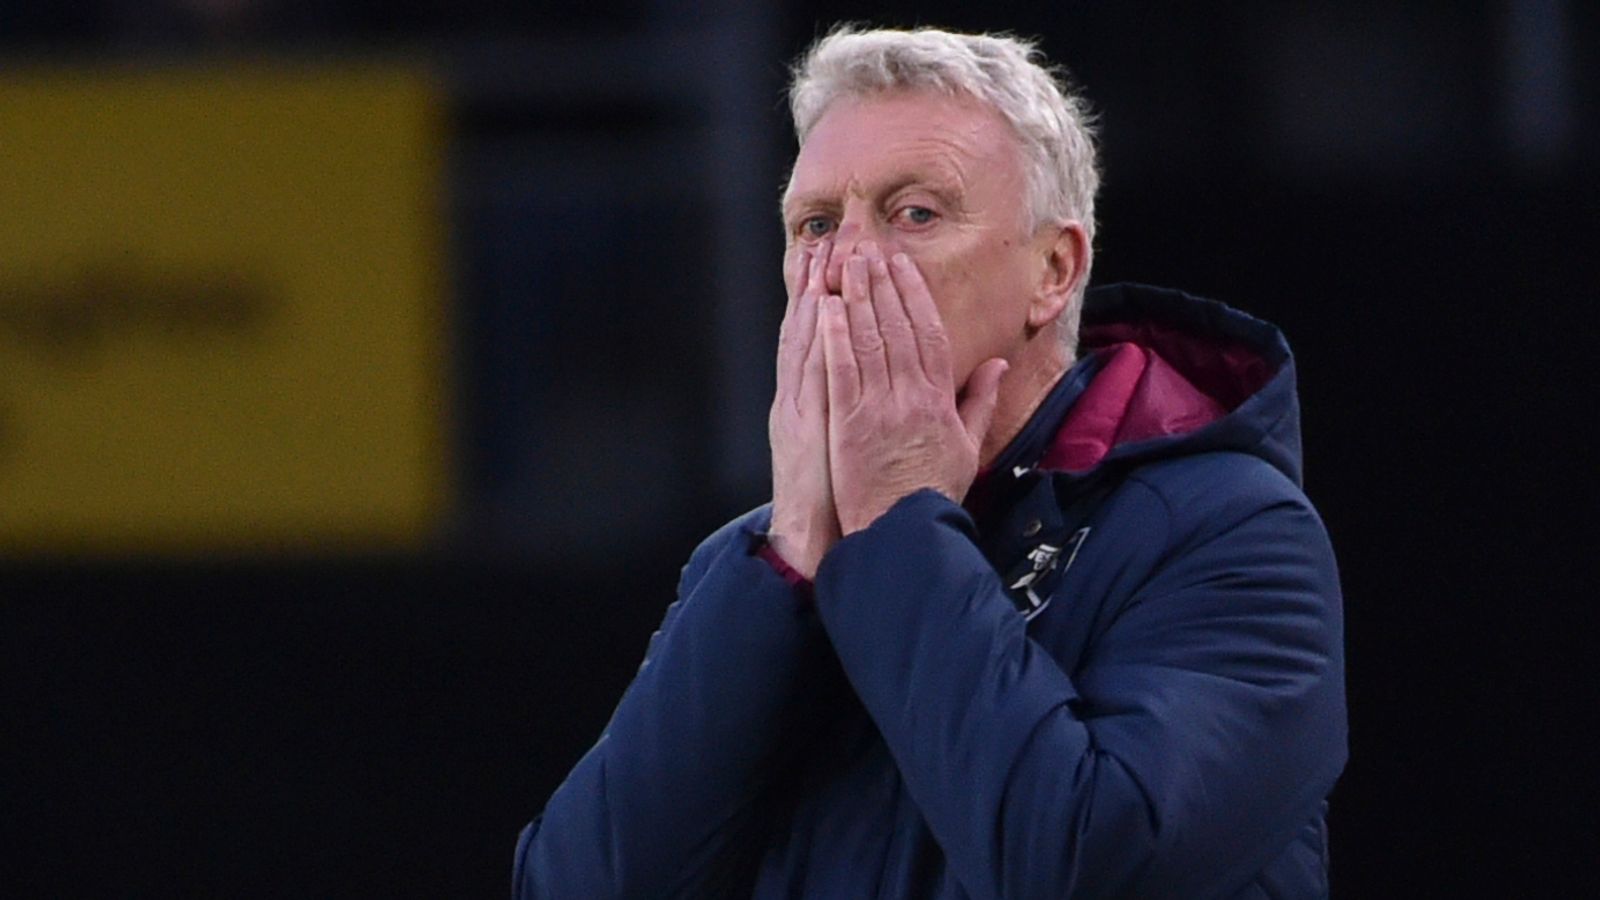 West Ham's David Moyes reacts as he watches